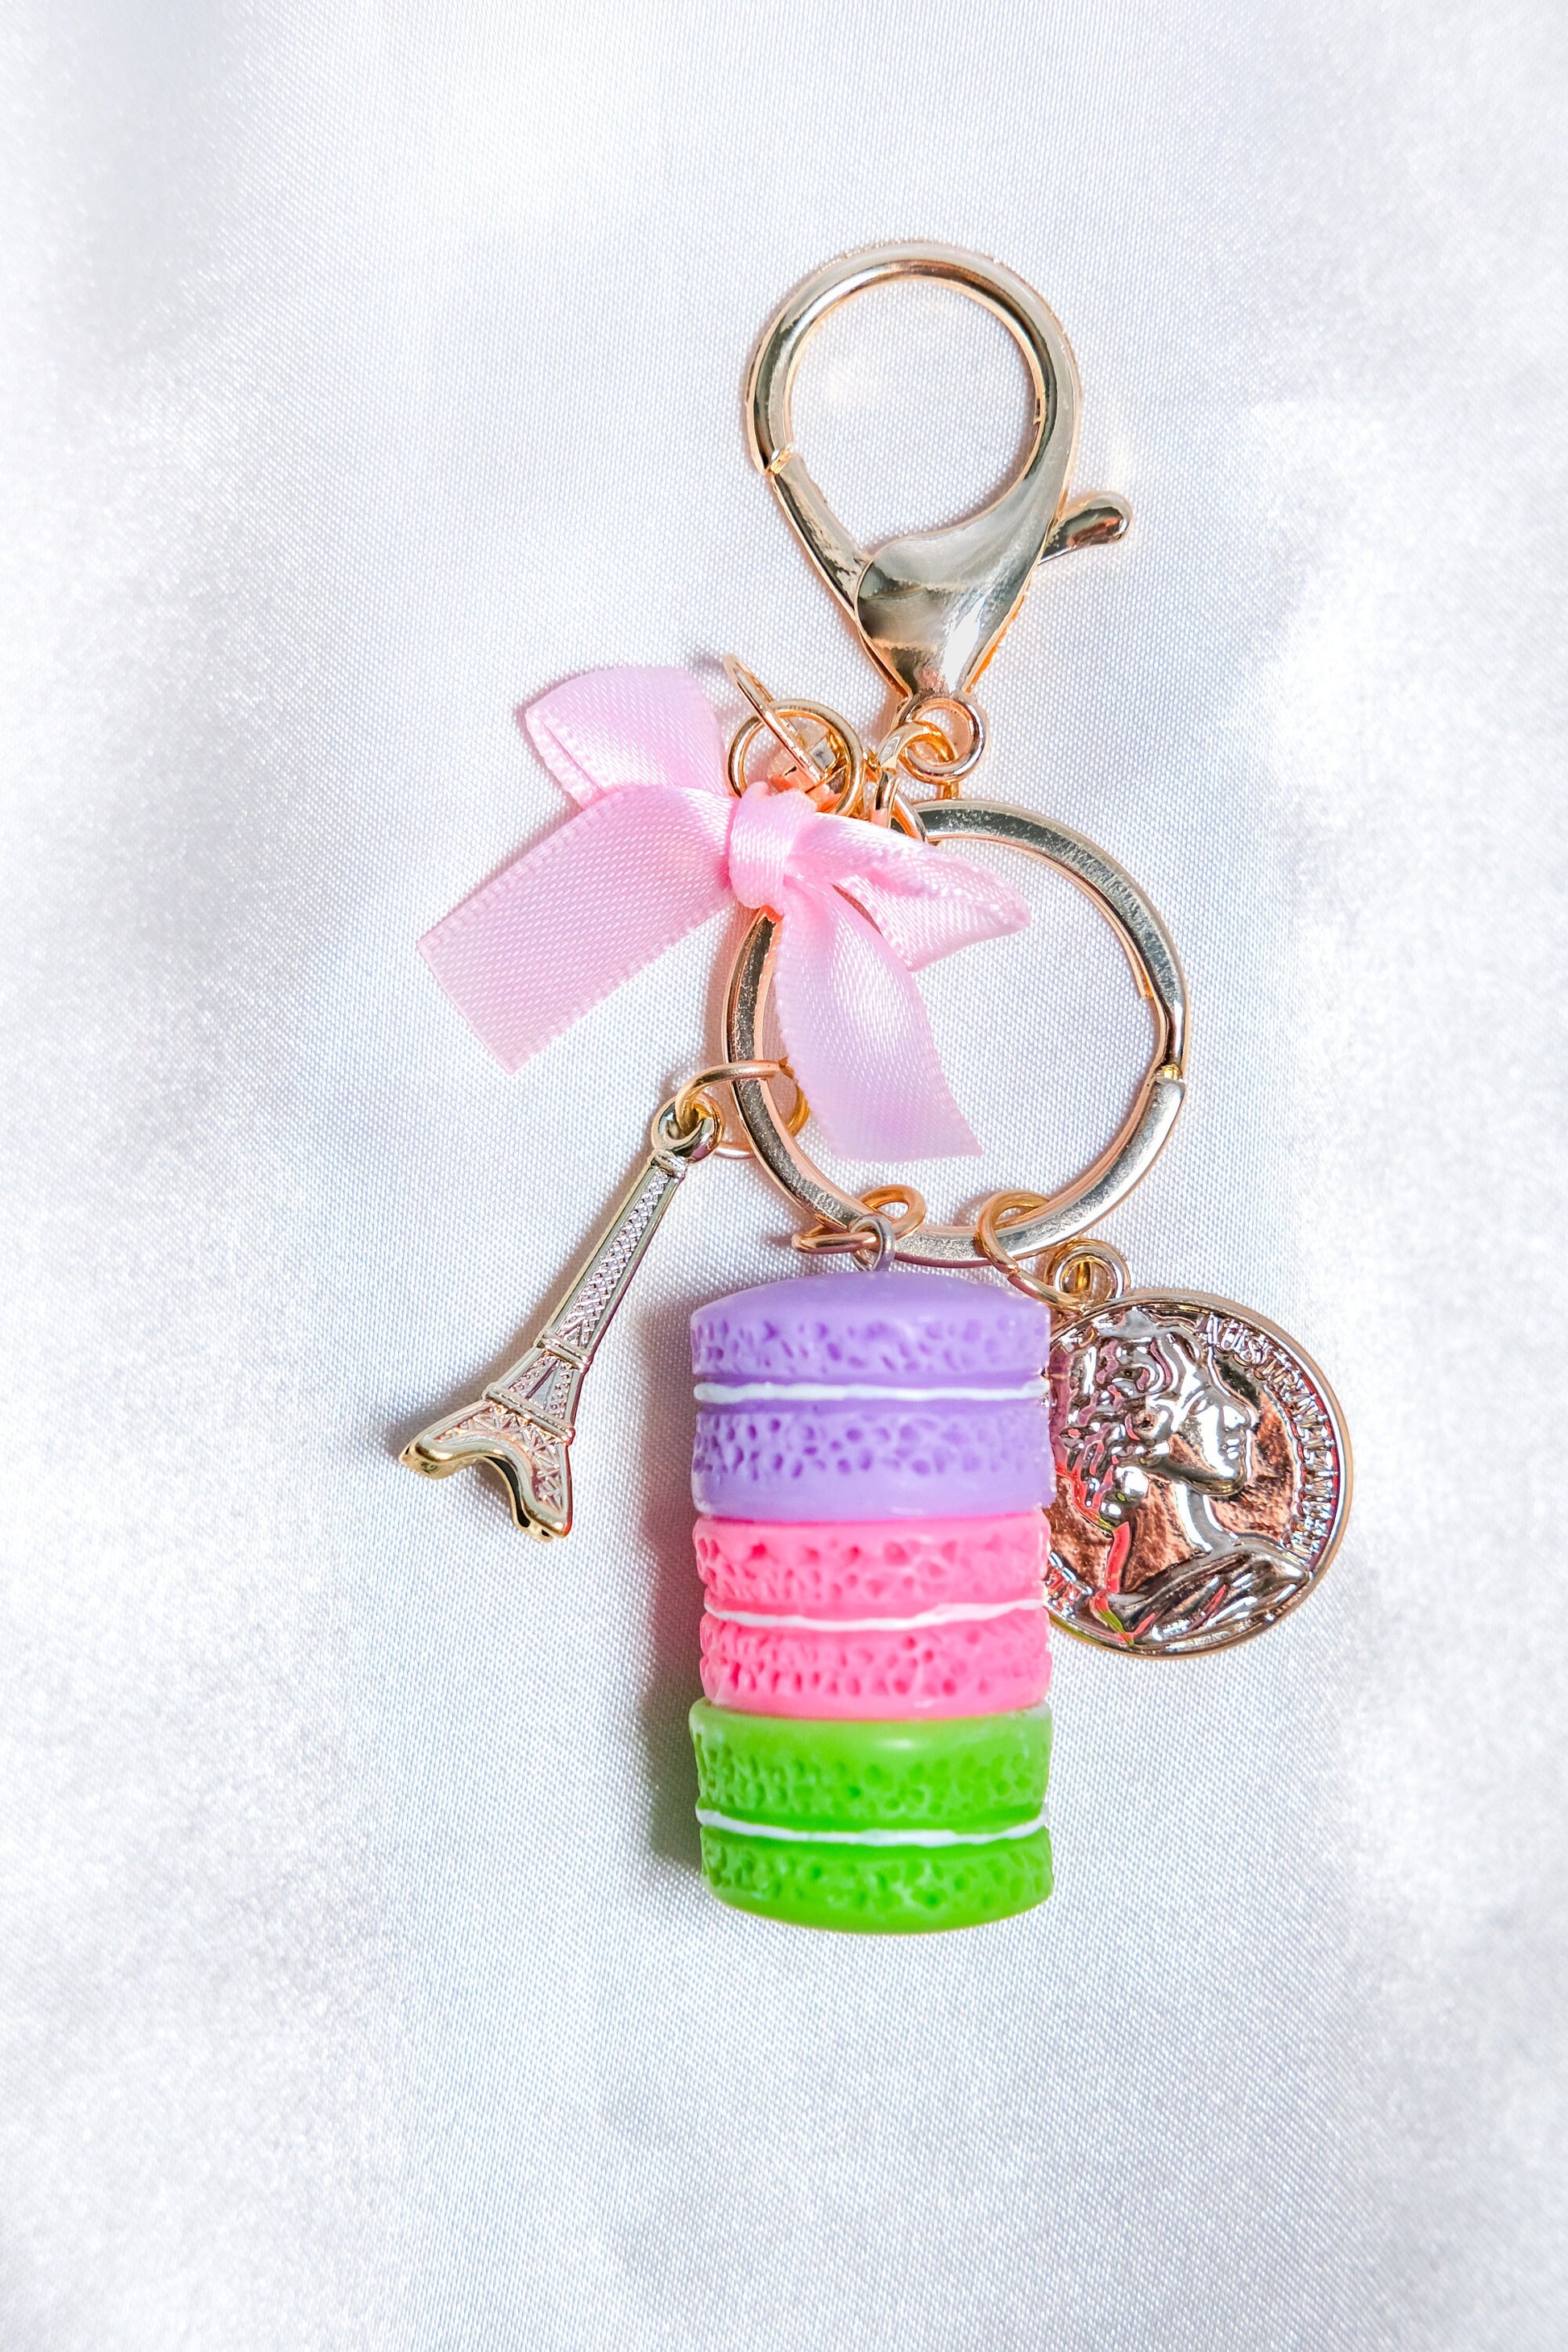 Cute Paris Keychain Eiffel Tower Gift Accessory Aesthetic Gift Idea For Friend Macaron Keychain For Her French Macaroons Purse Charm